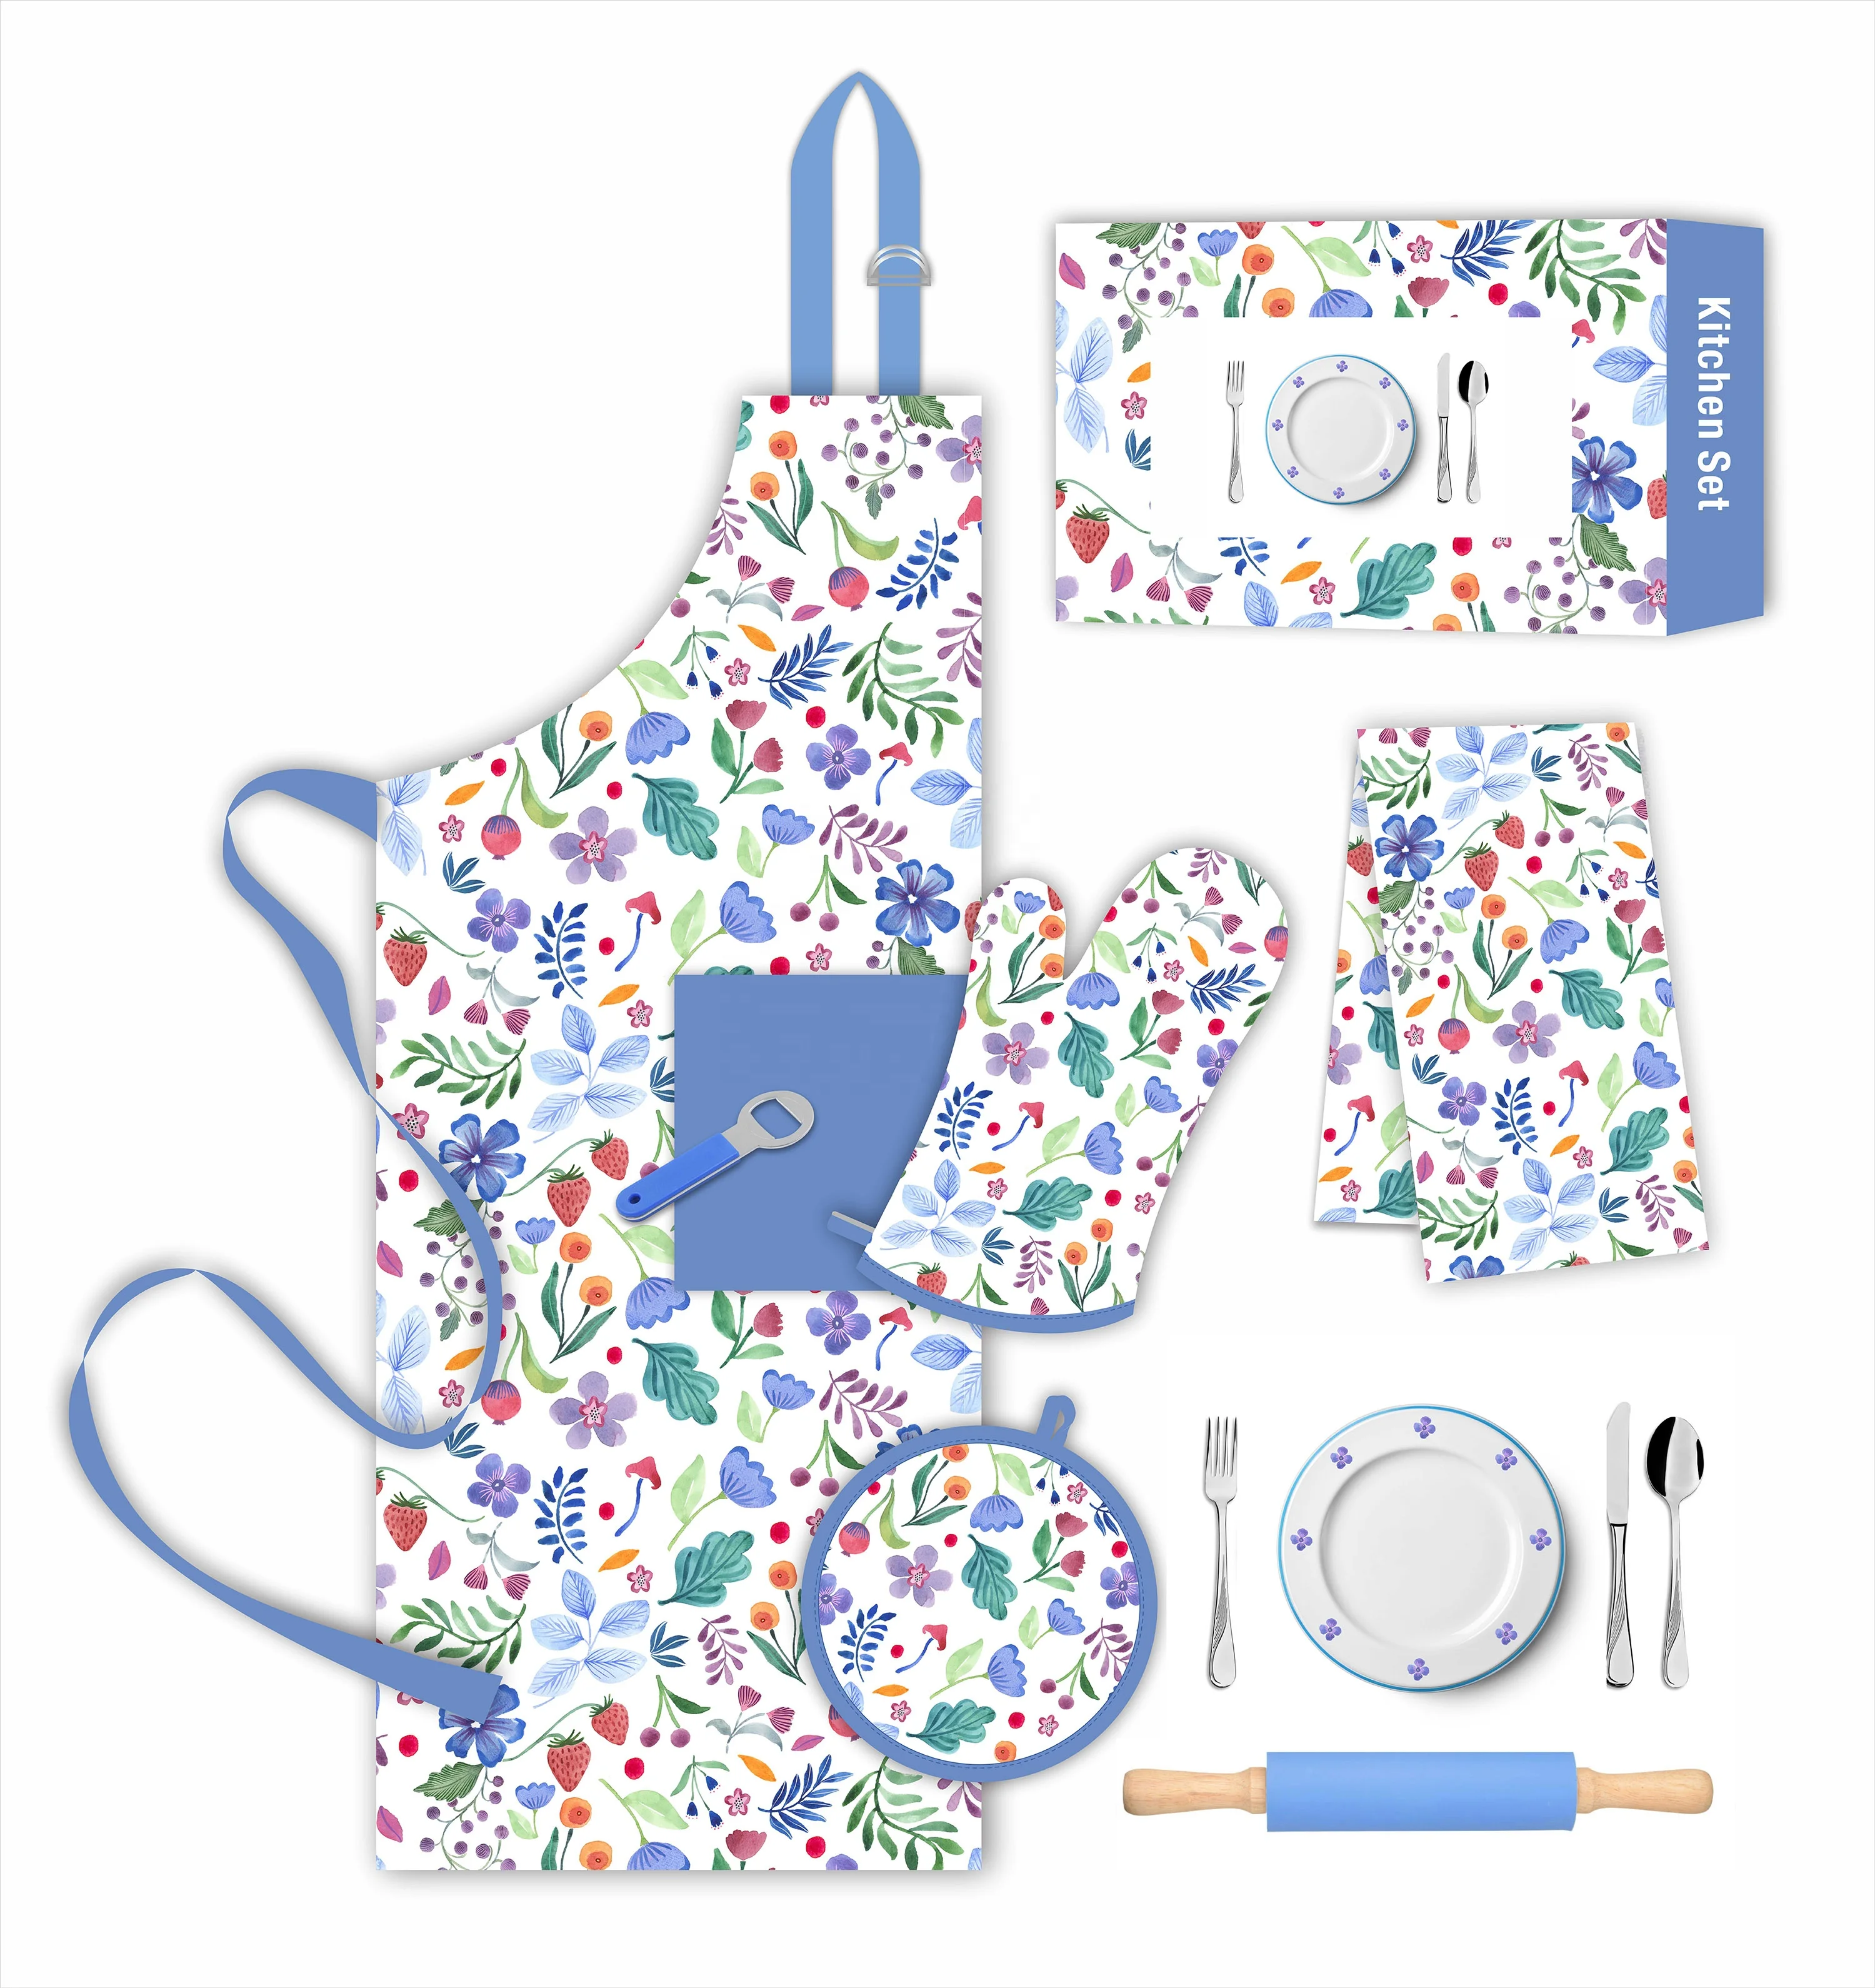 BBQ accessories set aprons for grilling custom logo kitchen apron kit kitchen chef cooking bib yarn dyed grill apron with tools